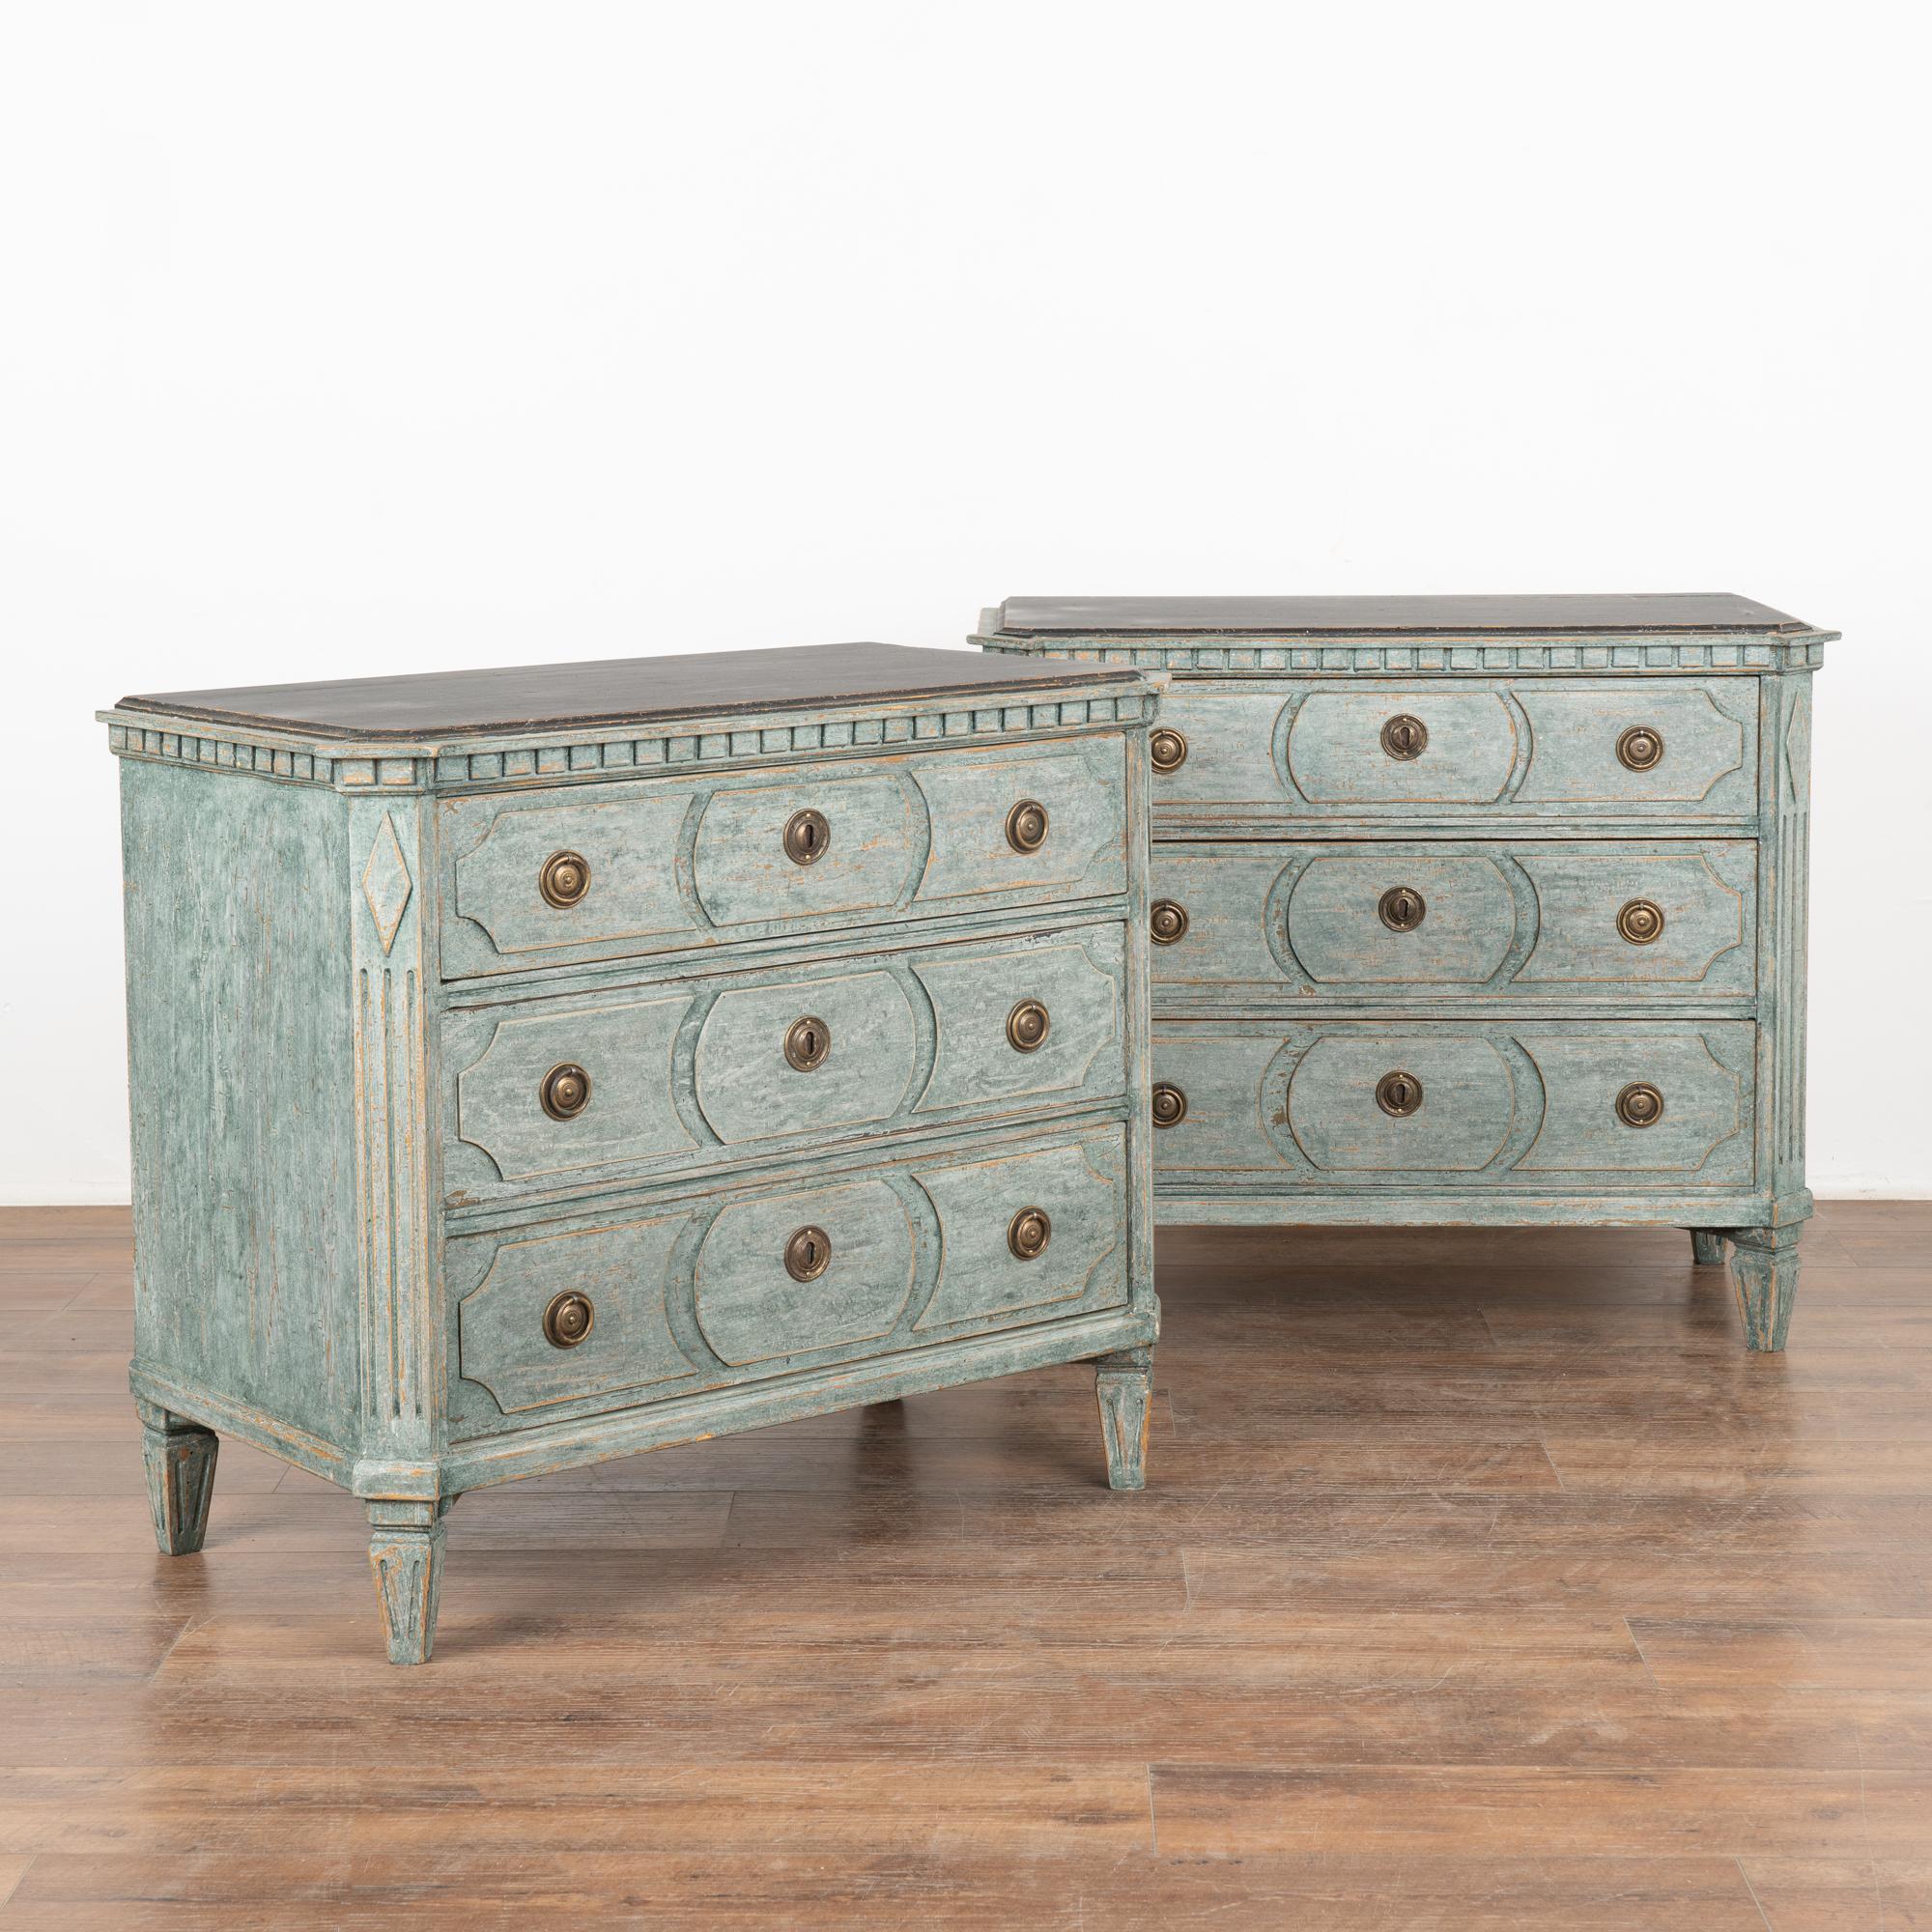 A pair of decorative Gustavian pine chest of drawers with canted fluted side posts with upper carved diamond medallion and dentil molding. All resting on four tapered fluted feet.
The newer, professionally applied layered blue (with soft white